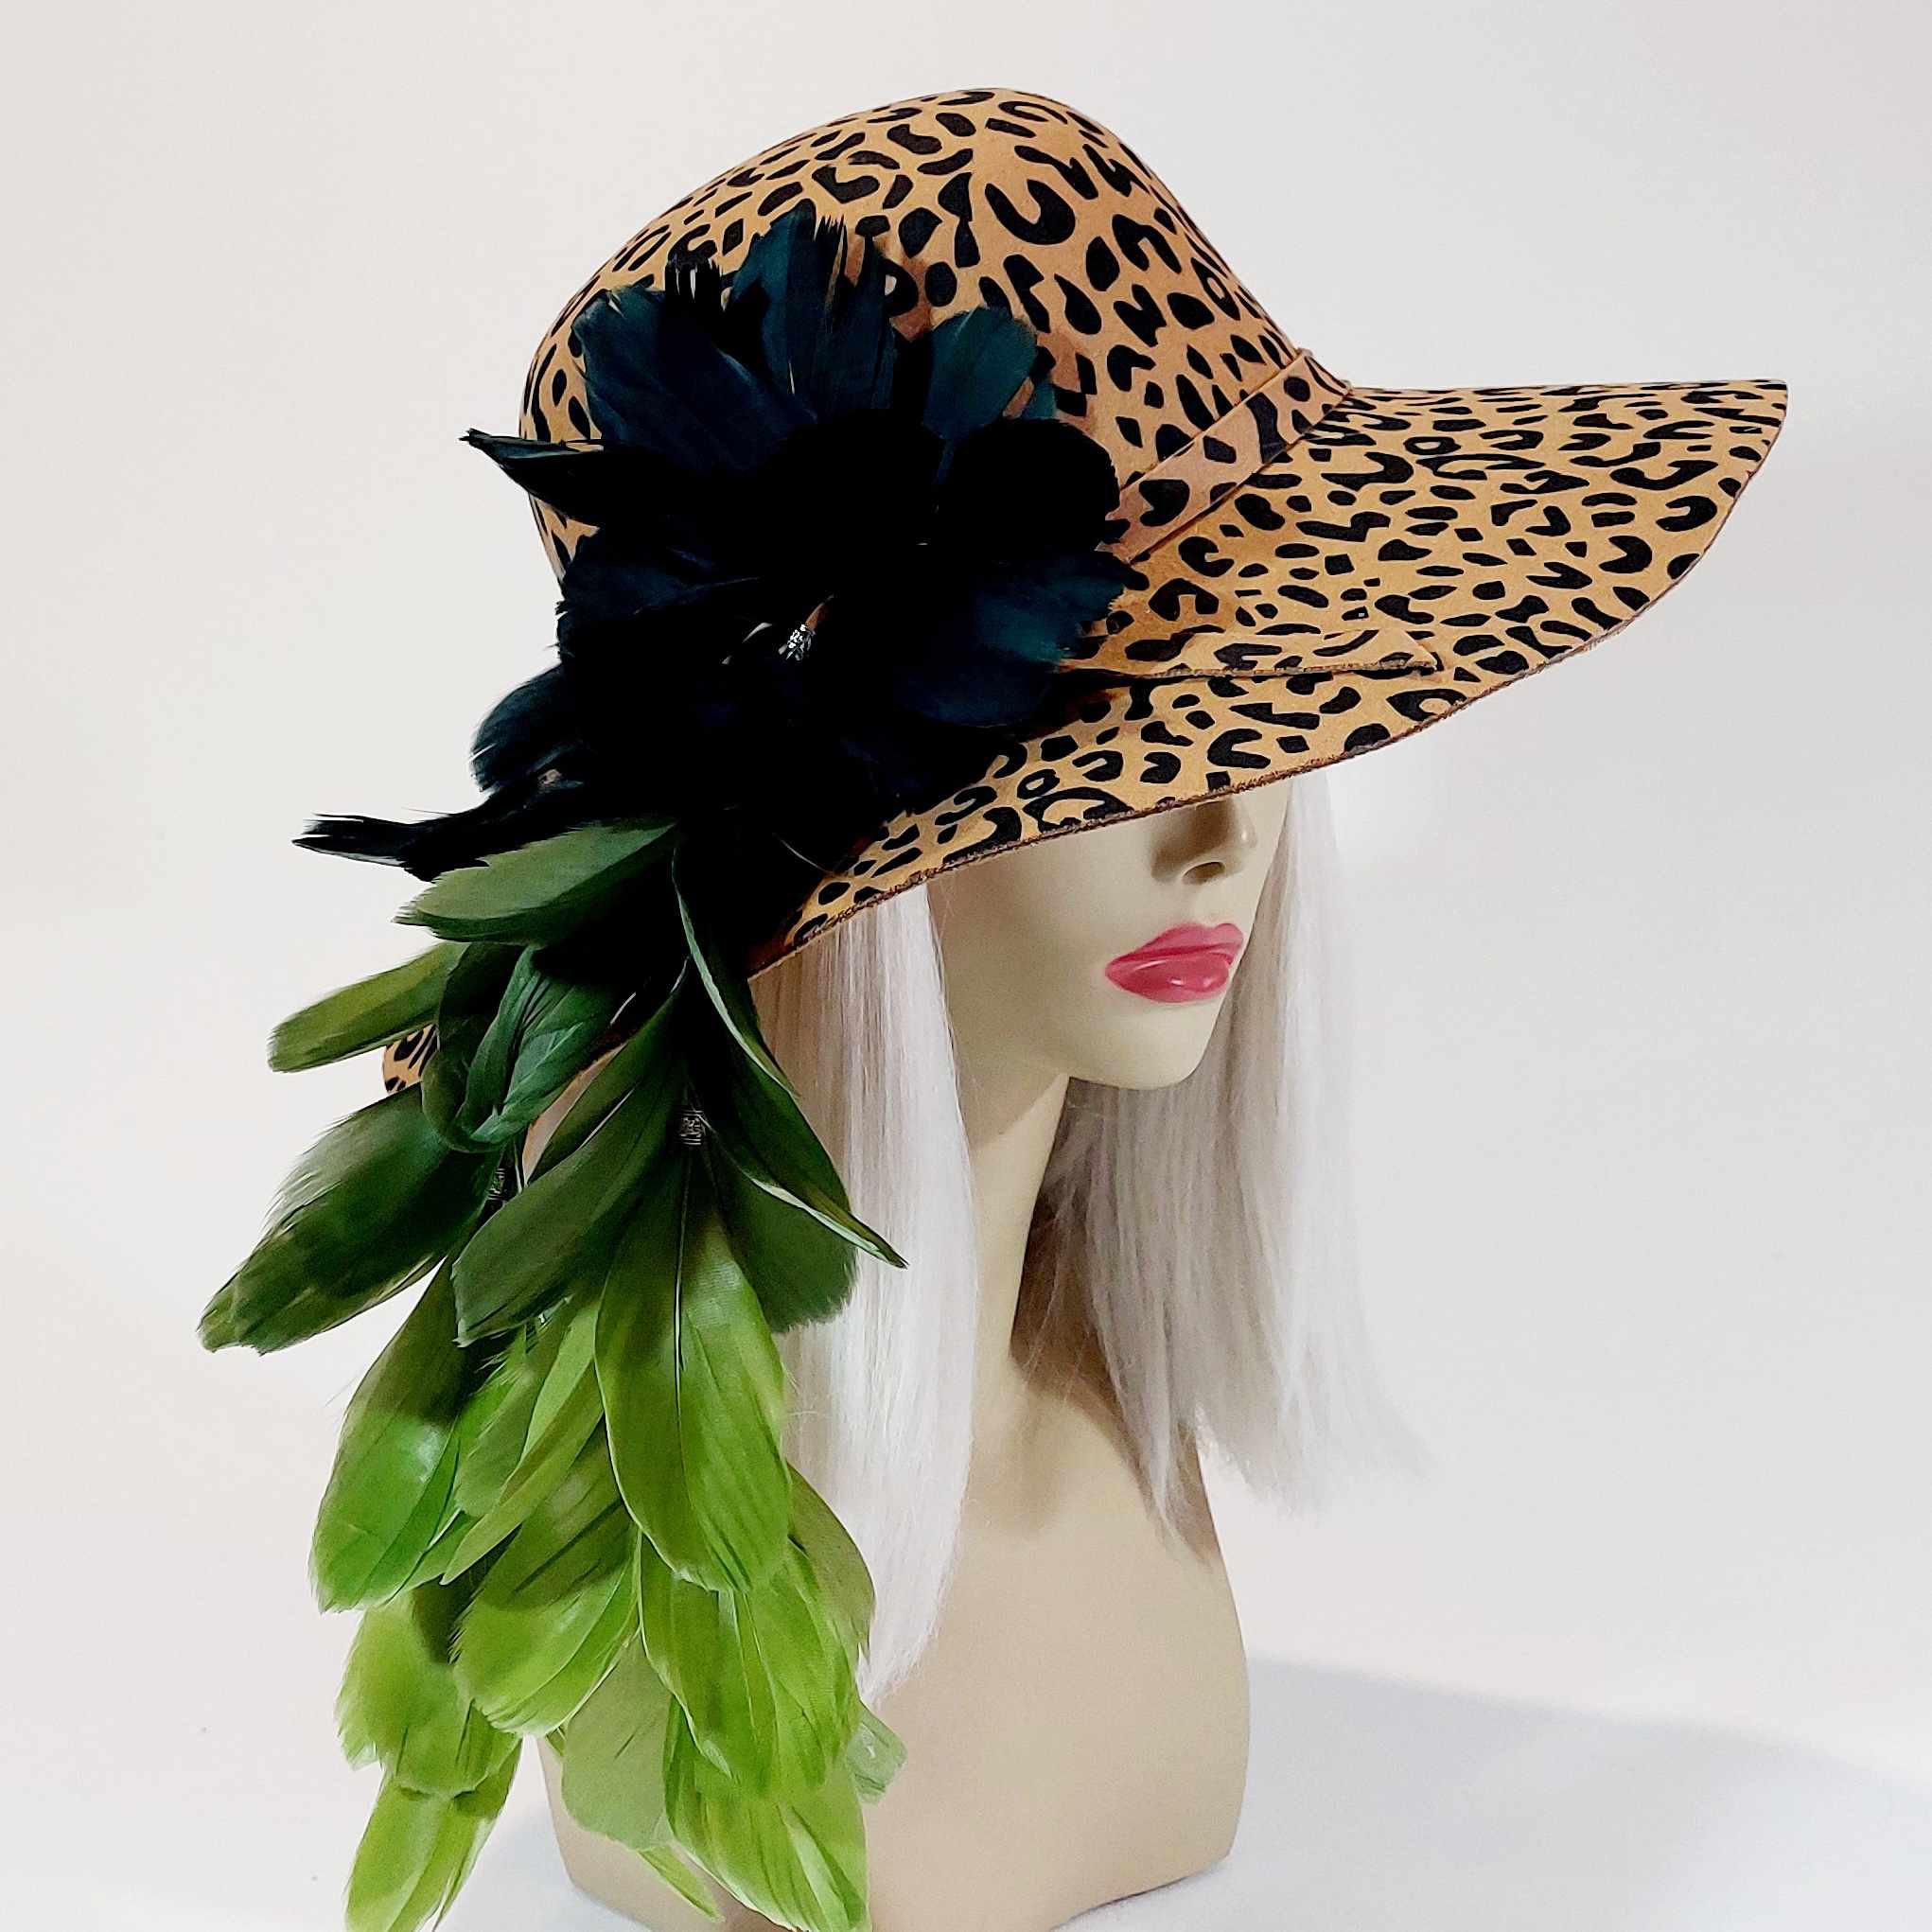 wear divalicious feather and felt hats to the races and festivals